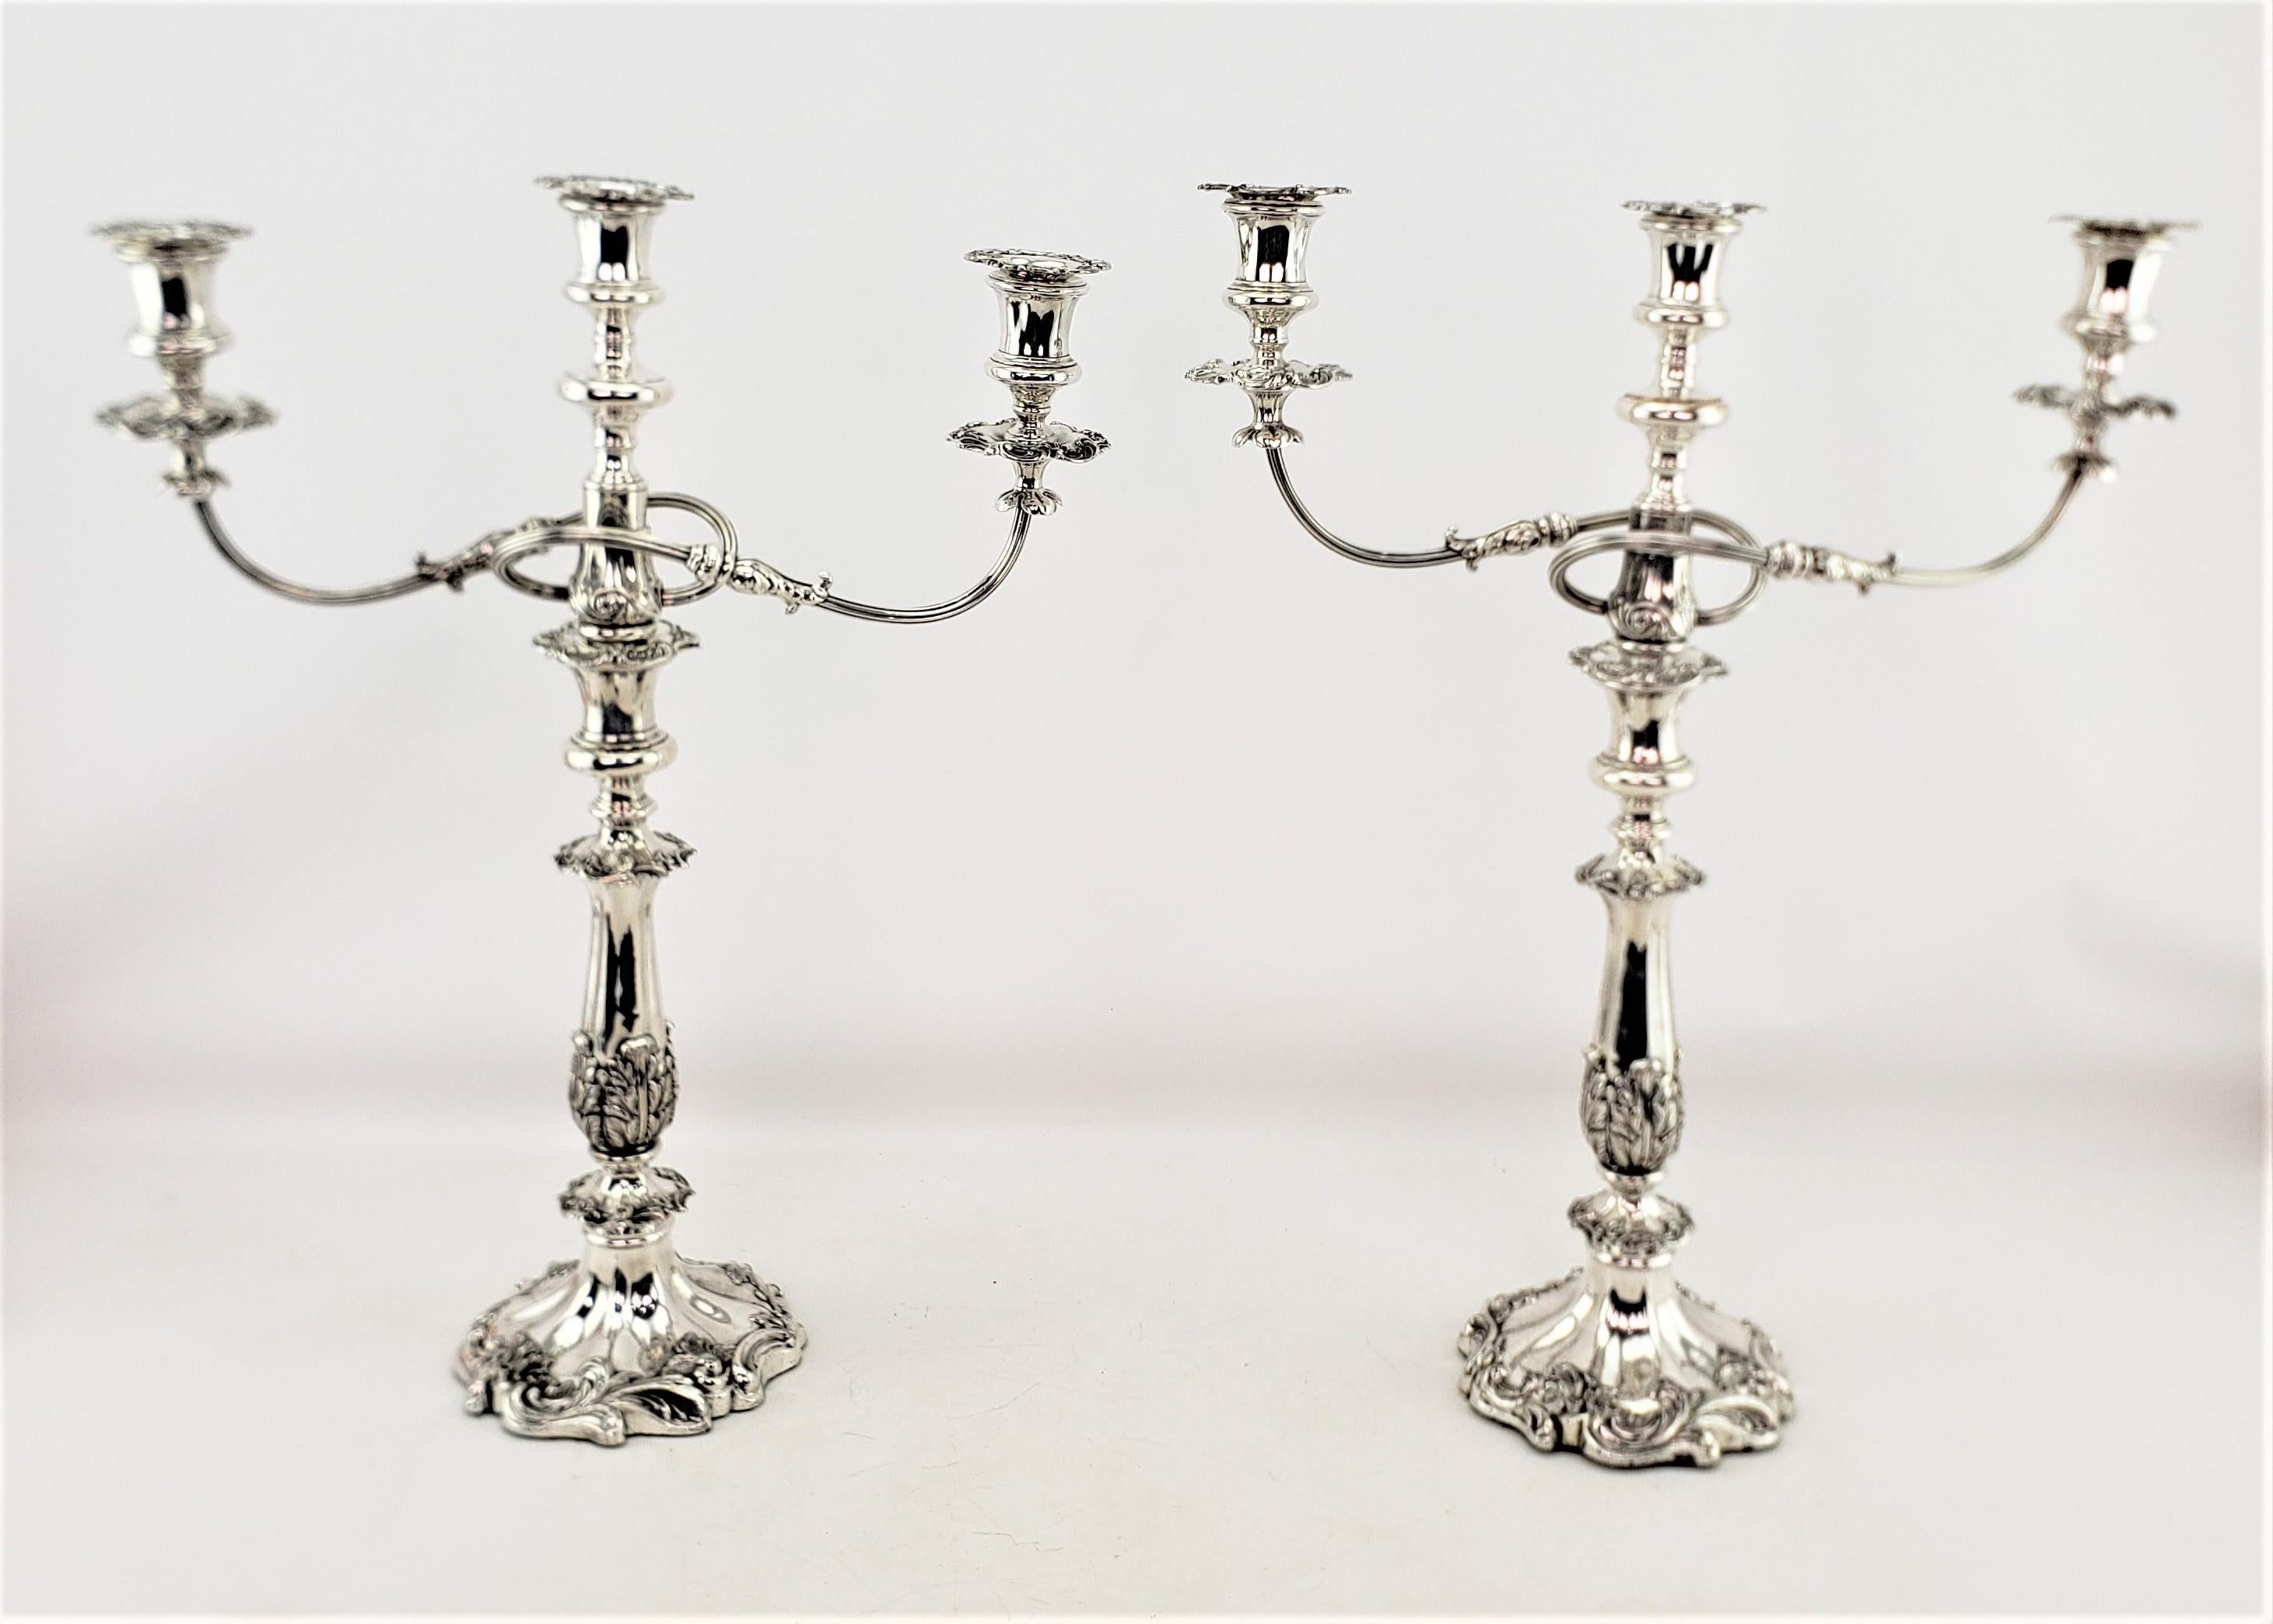 Antique Silver Plated Convertible Candelabras or Candlesticks with Leaf Decor In Good Condition For Sale In Hamilton, Ontario